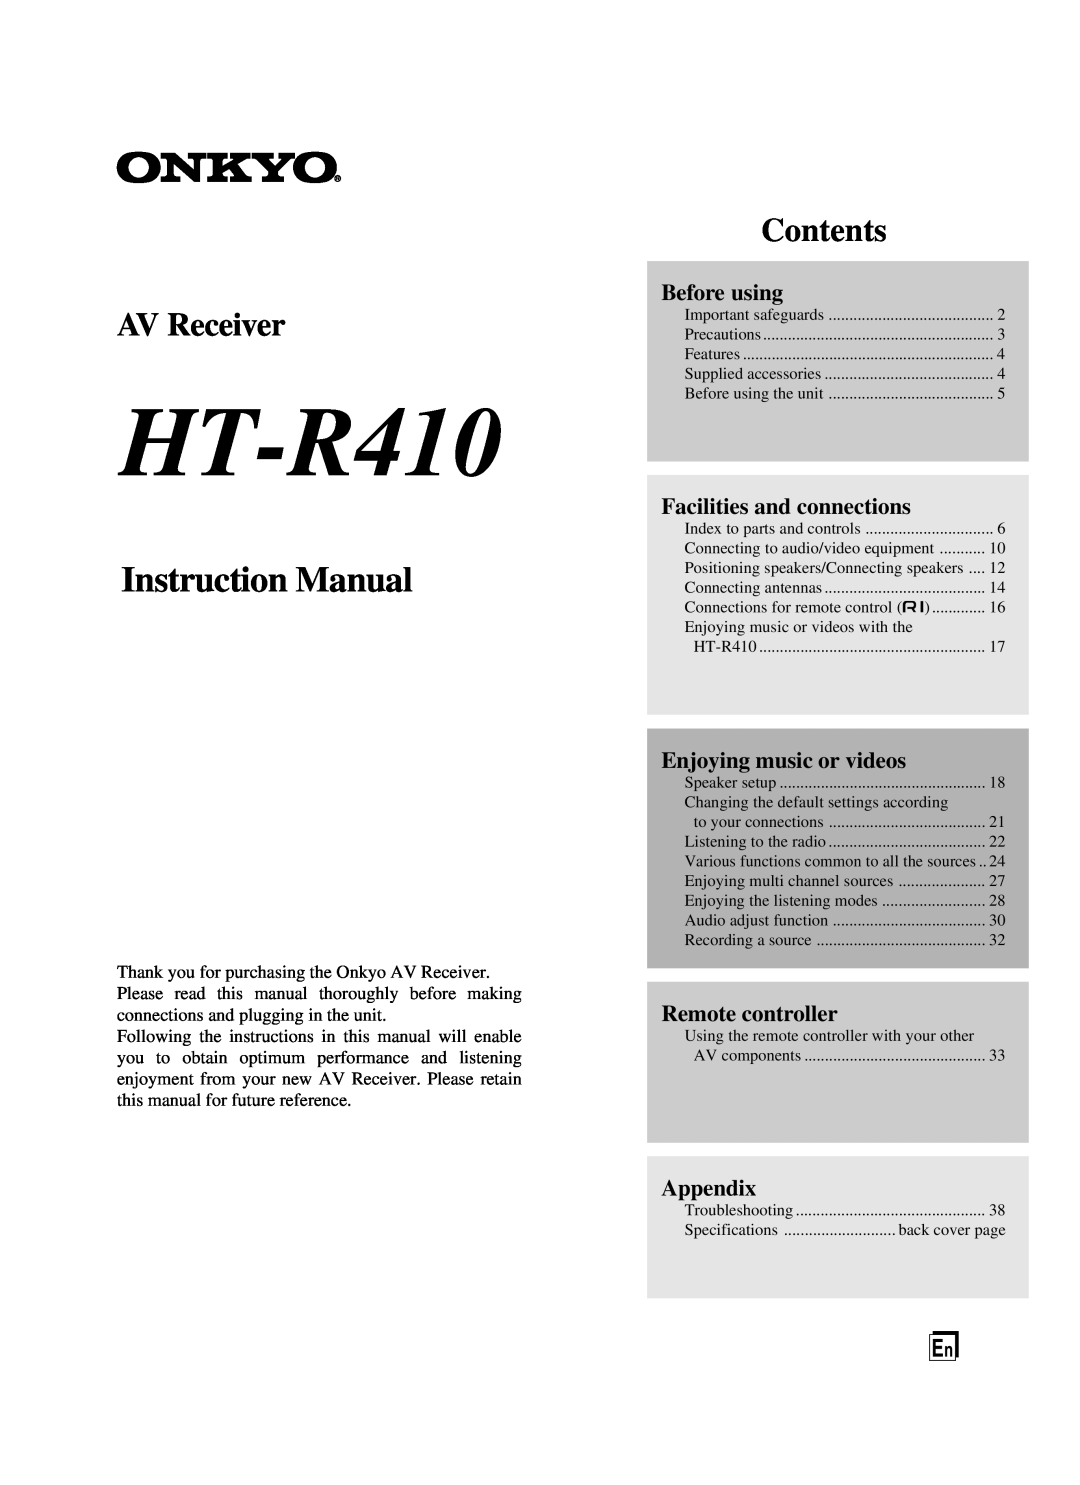 Onkyo HT-R410 instruction manual Insert the batteries, Connect the supplied FM and AM indoor antennas 